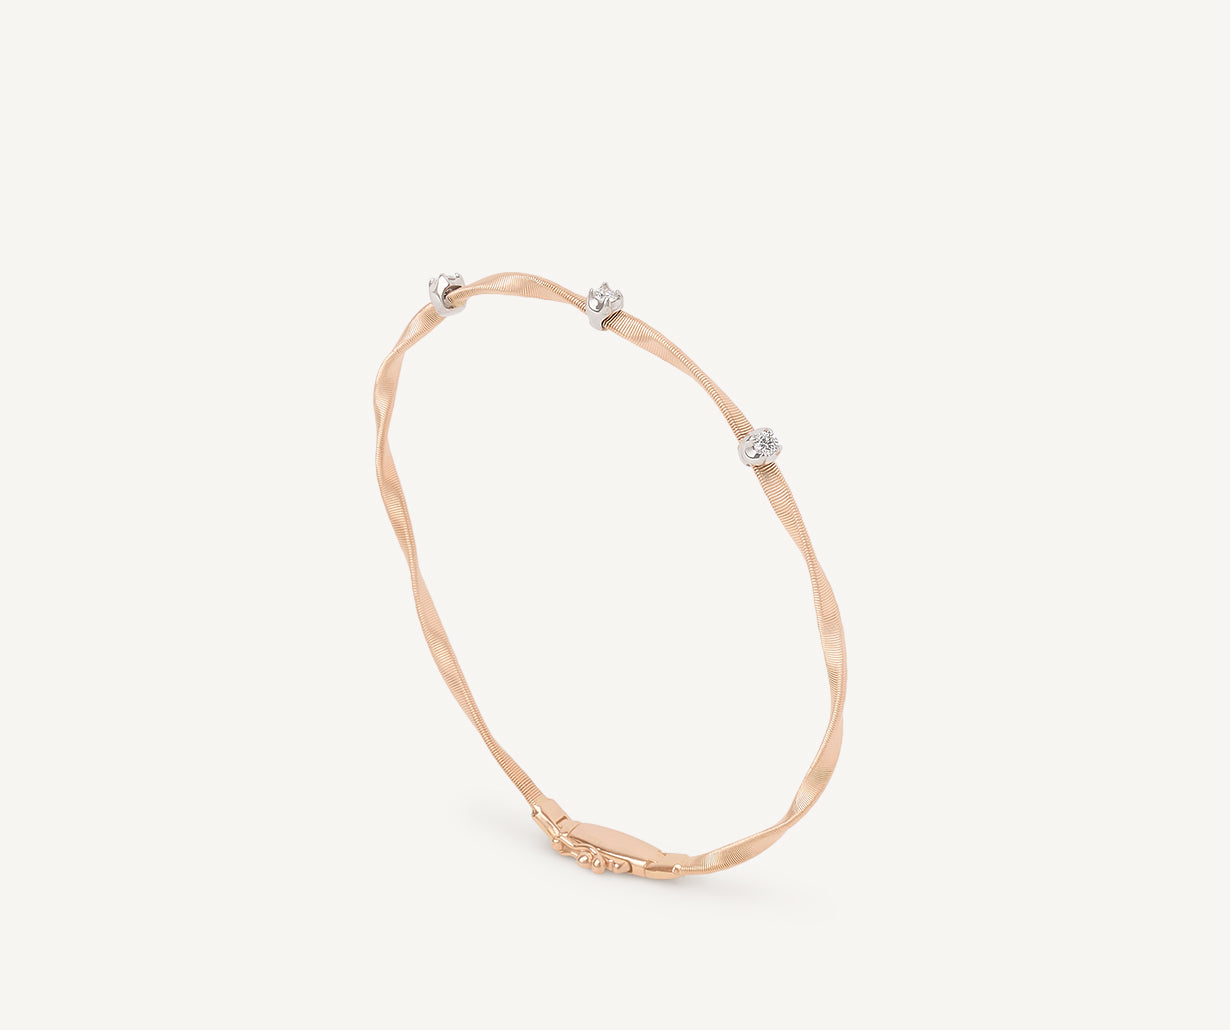 One strand rose gold with three diamonds Marrakech bracelet by Marco Bicego